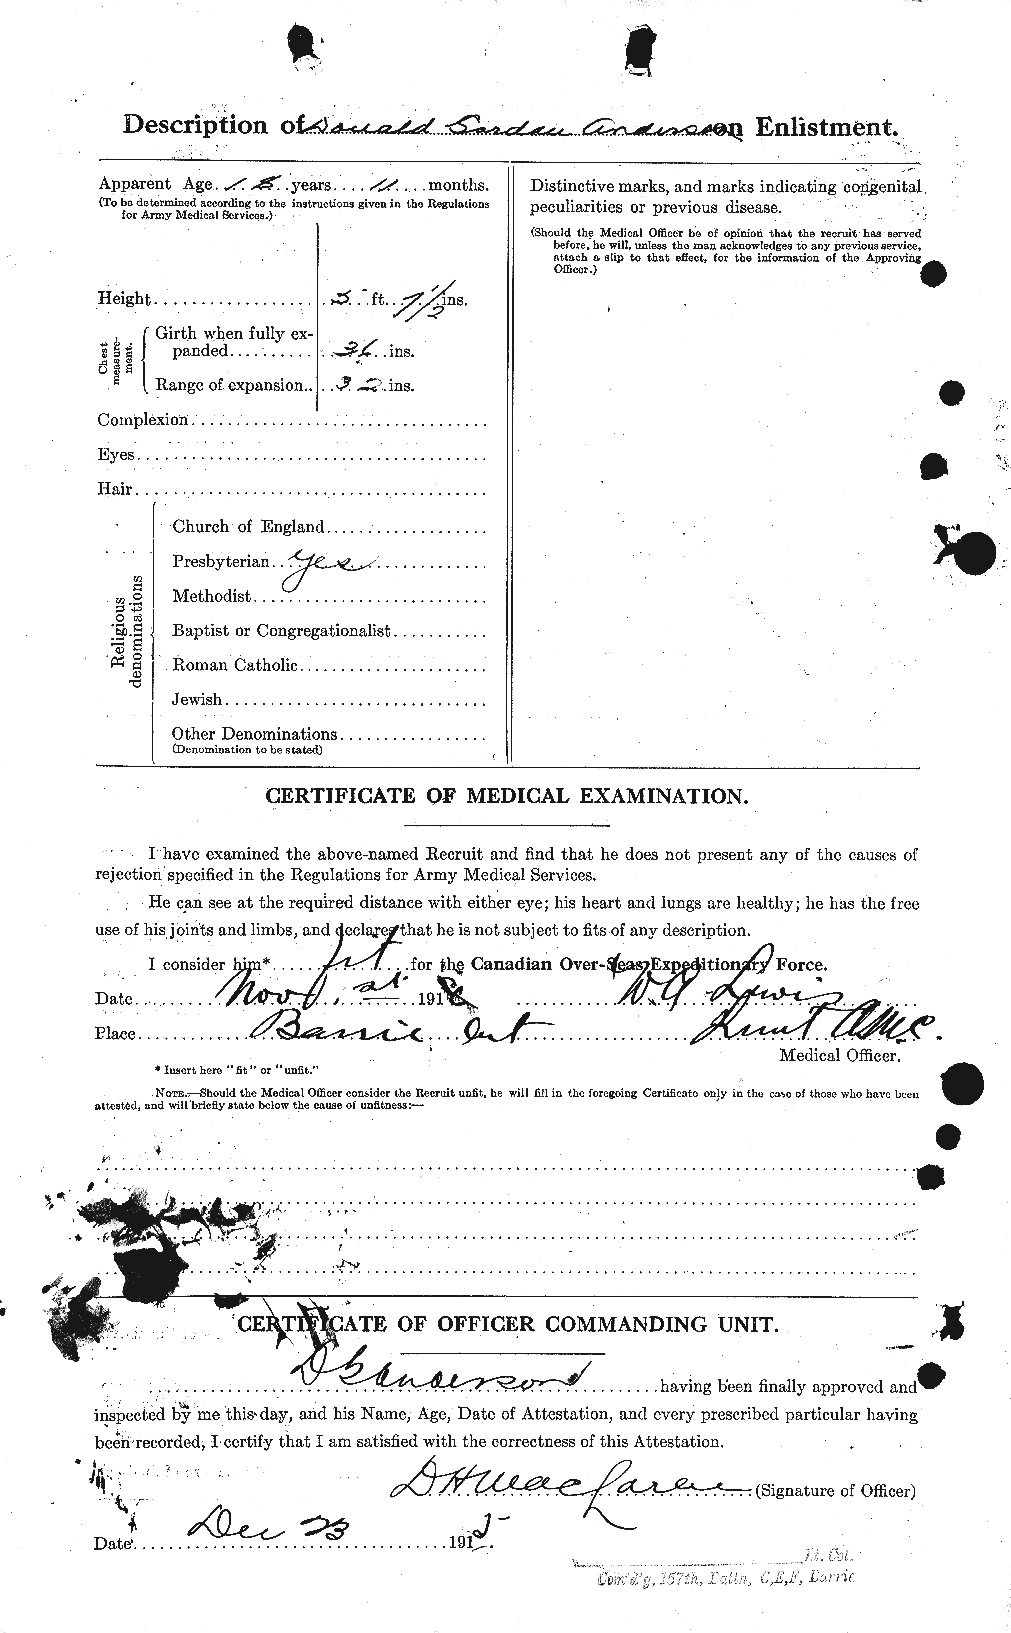 Personnel Records of the First World War - CEF 209986b